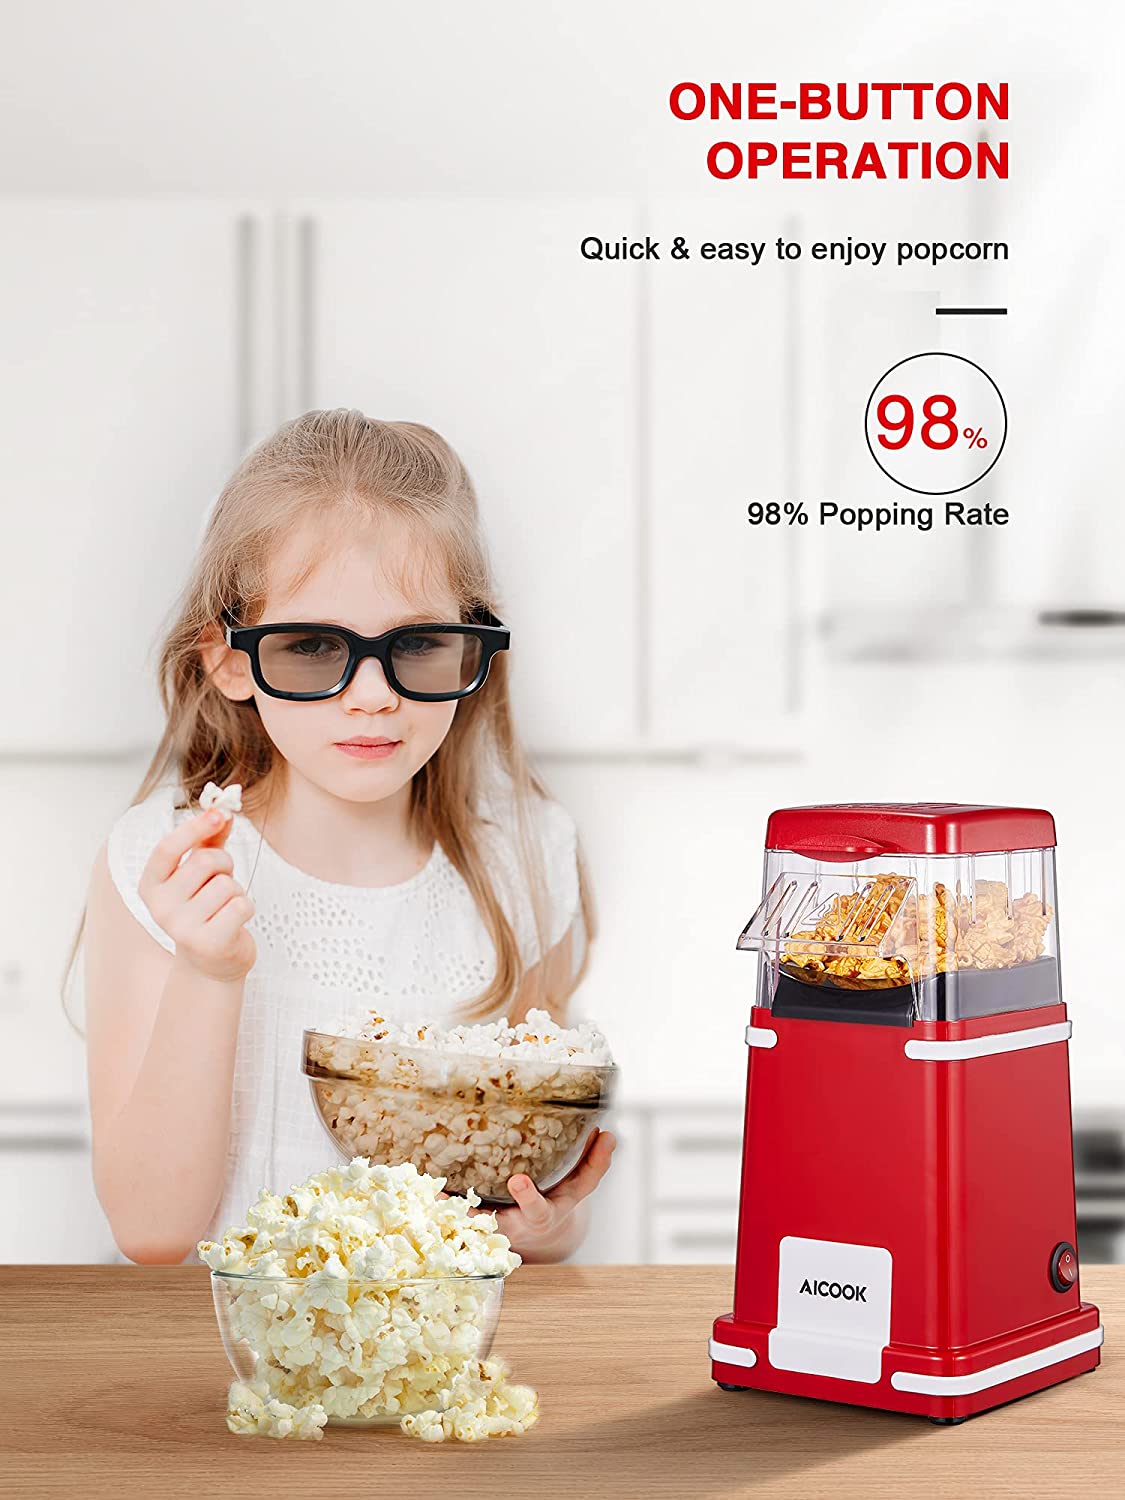 AICOOK | Popcorn Maker, Hot Air Retro Popcorn Popper with Measuring Cup, Electric Home 1200W Popcorn Machine for Birthday Party, Christmas, Movie Nights, ETL Certified & BPA Free, One Button Operation